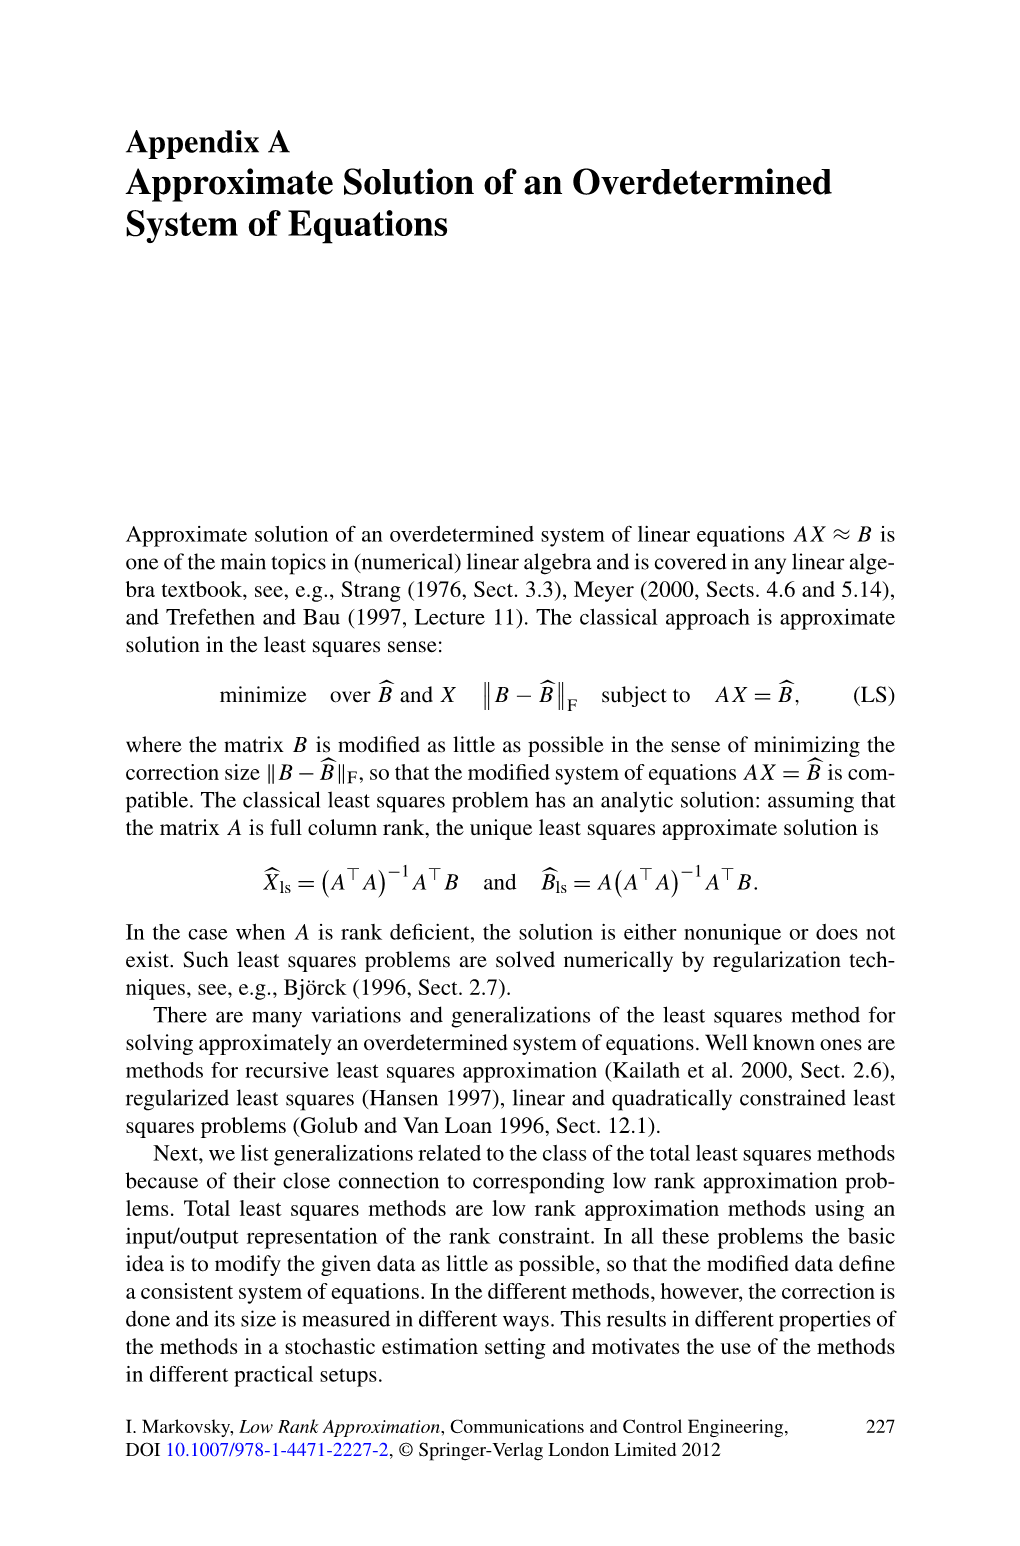 Approximate Solution of an Overdetermined System of Equations